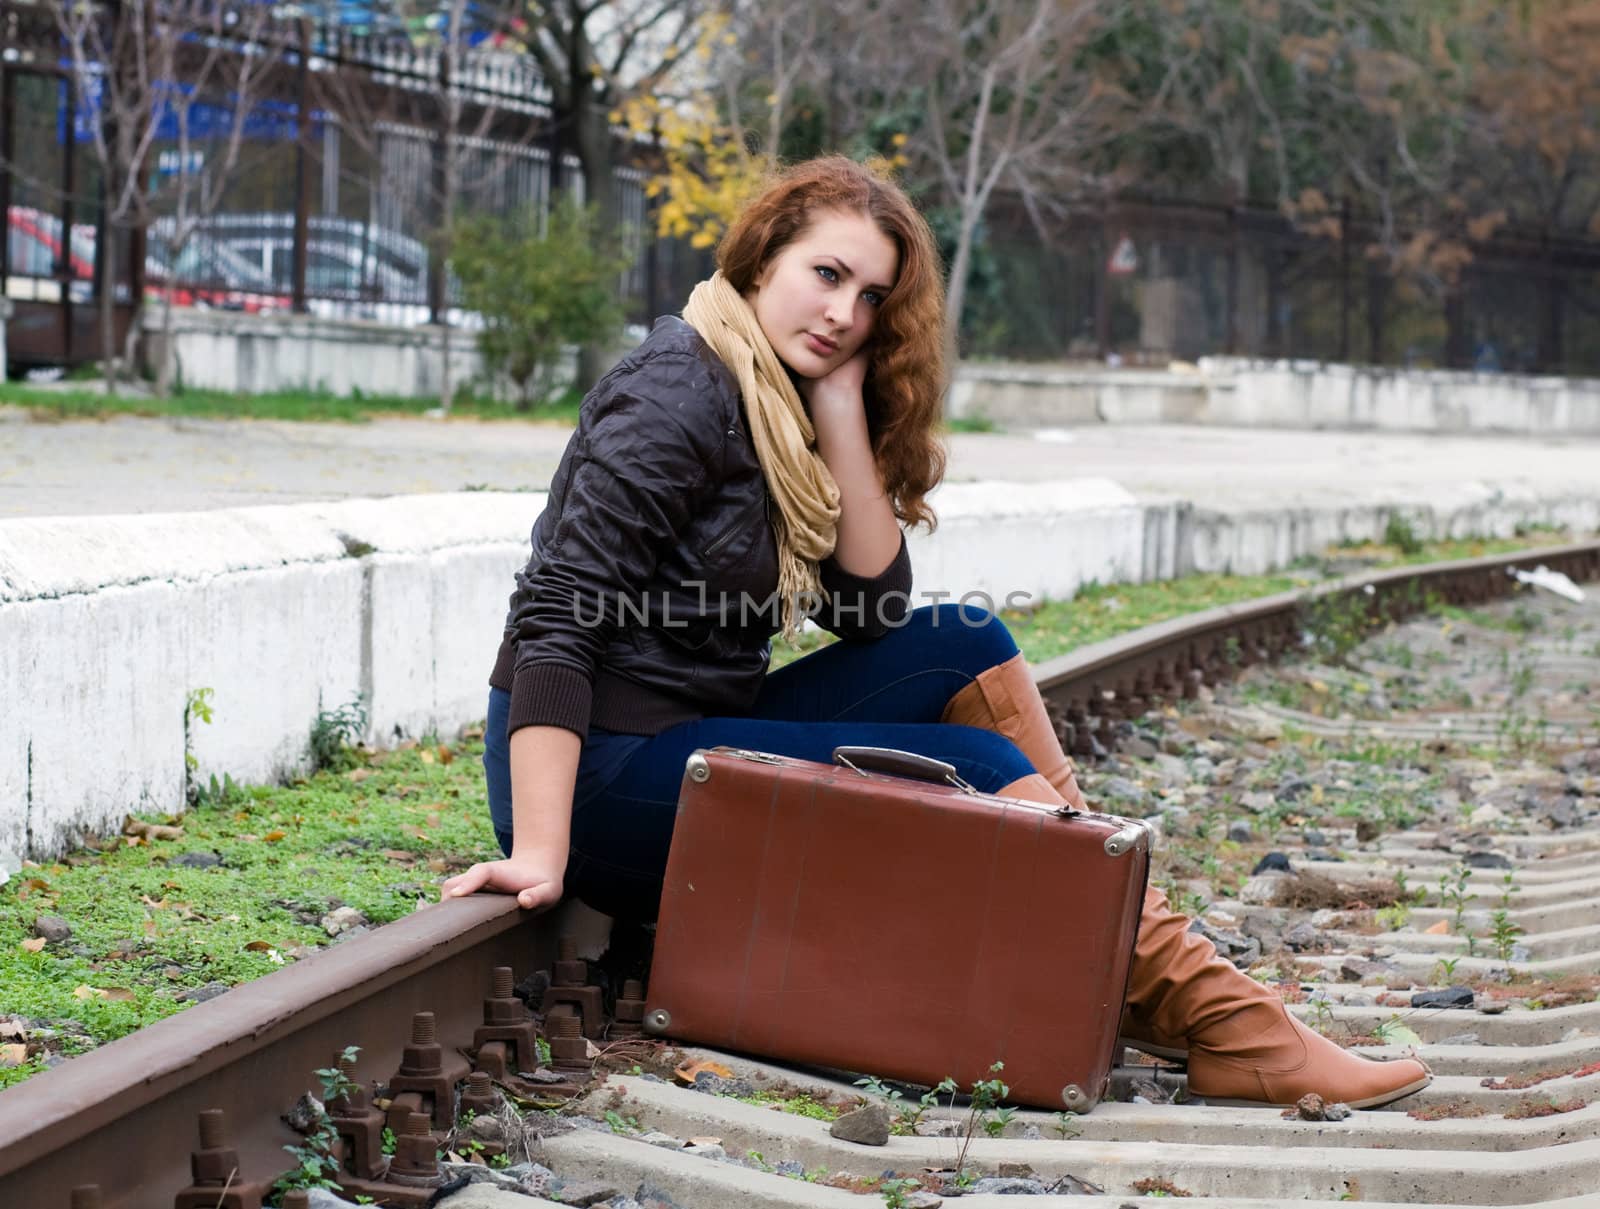 Beautiful girl sitting on a suitcase along the train tracks by Irina1977